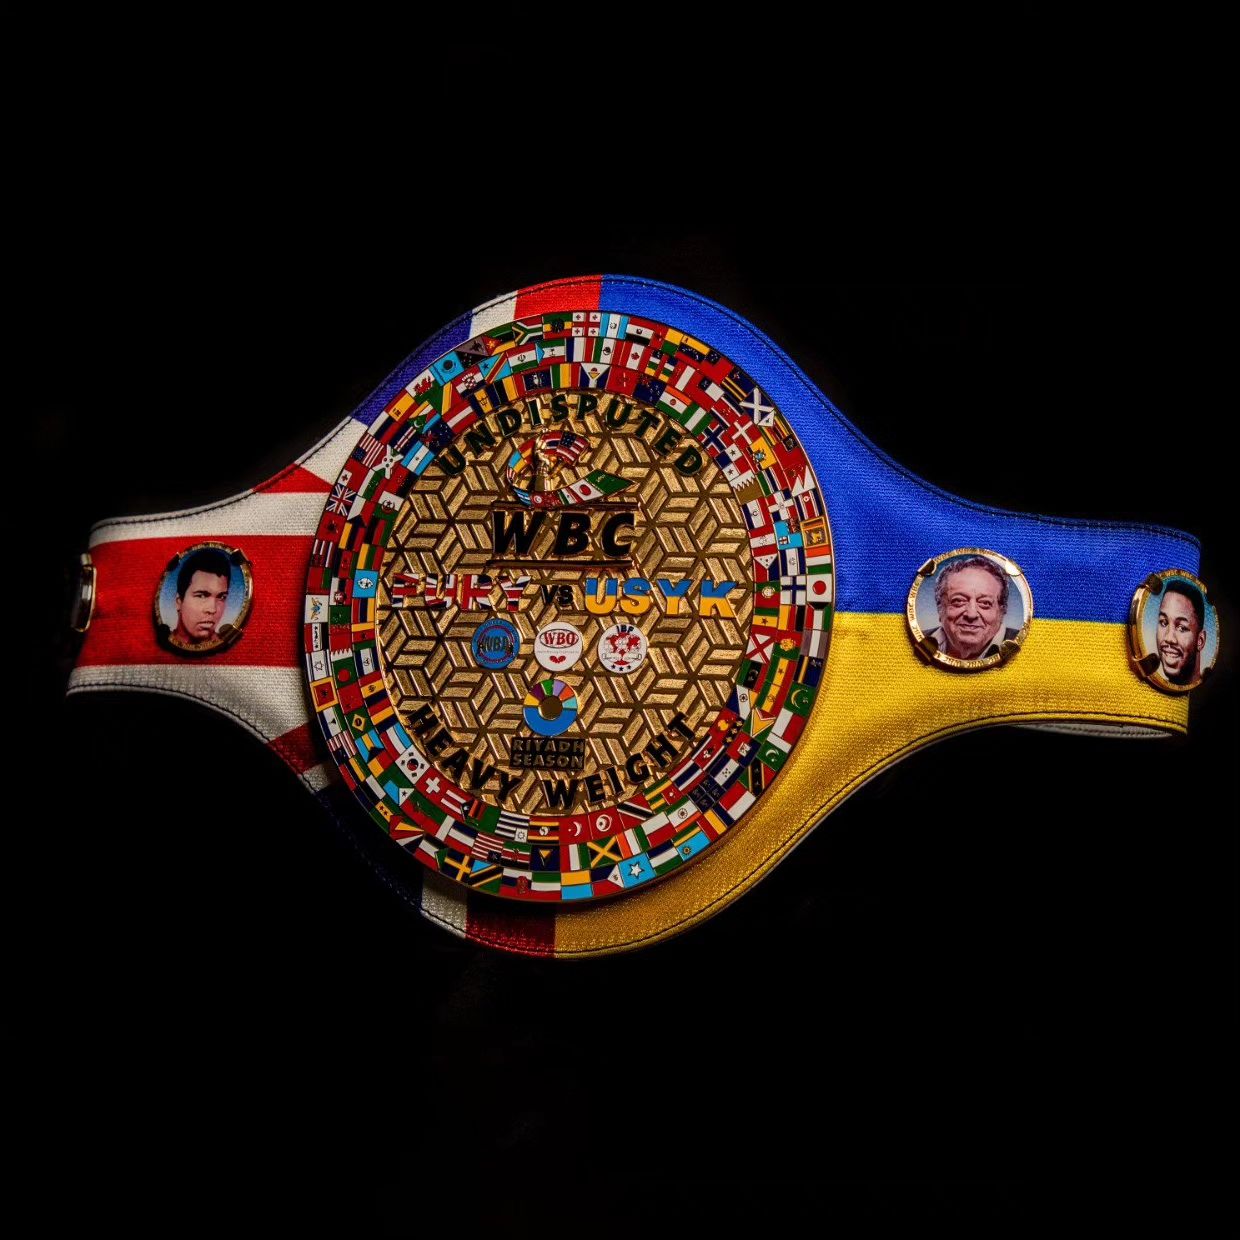 WBC presents special belt for the winner...